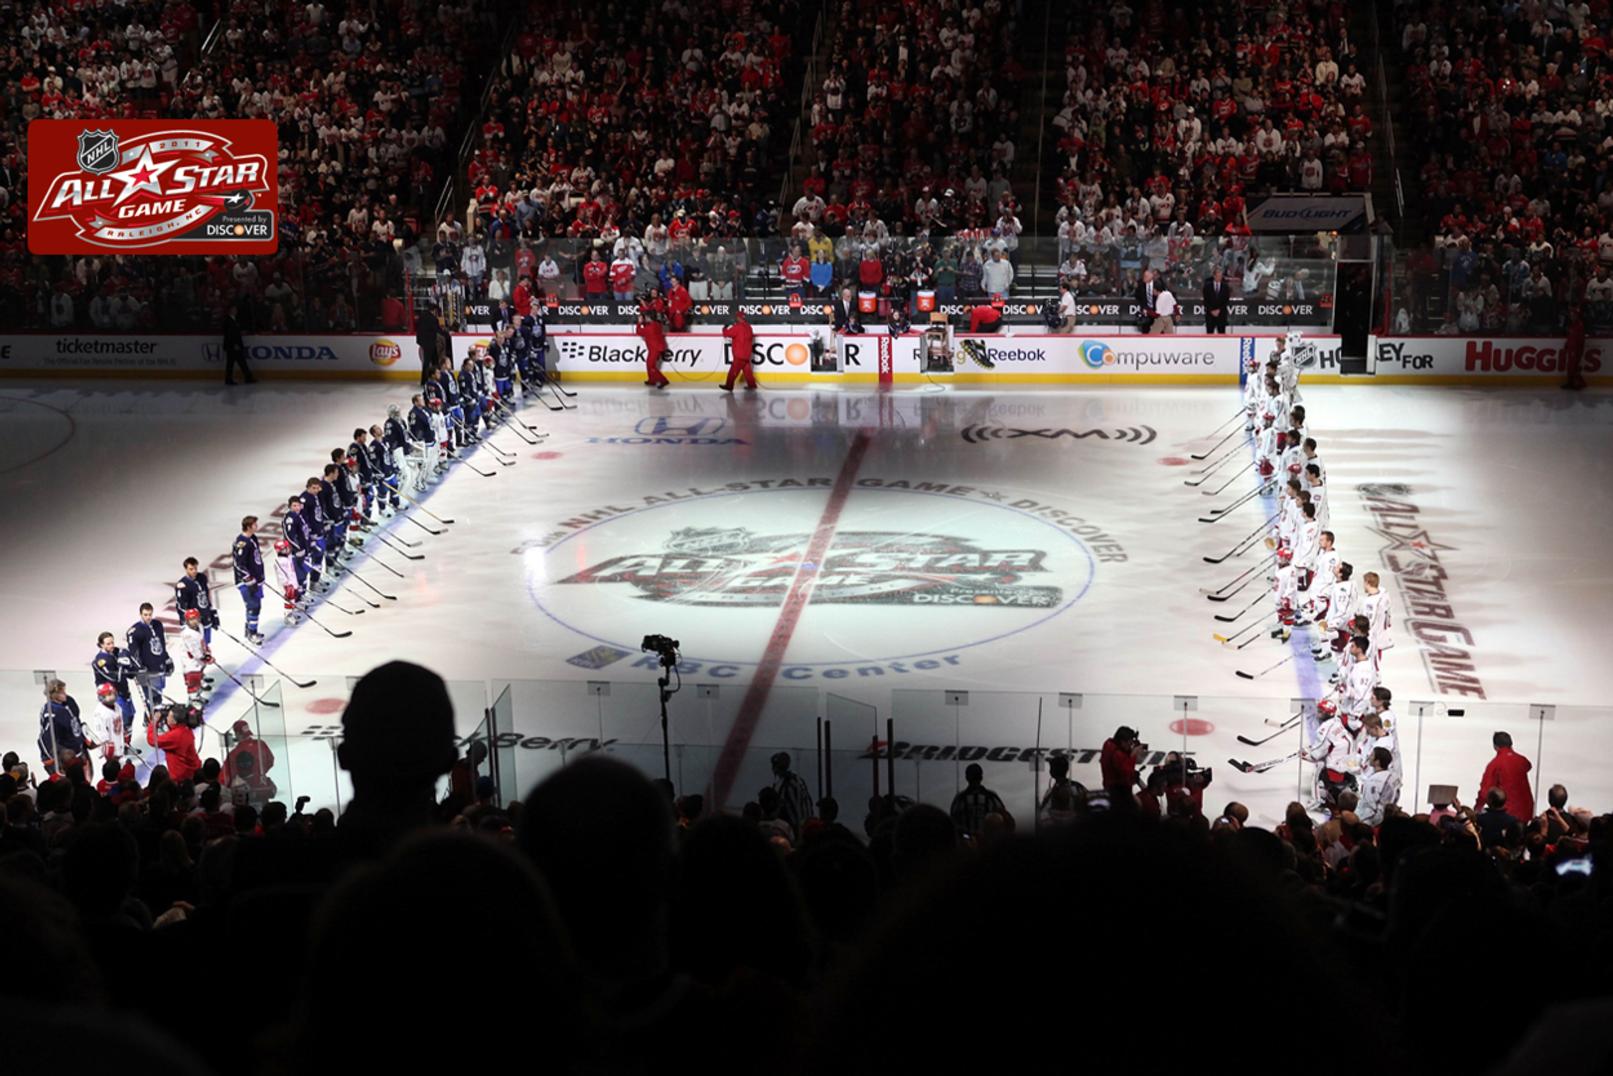 2011 NHL All Star Game, Raleigh